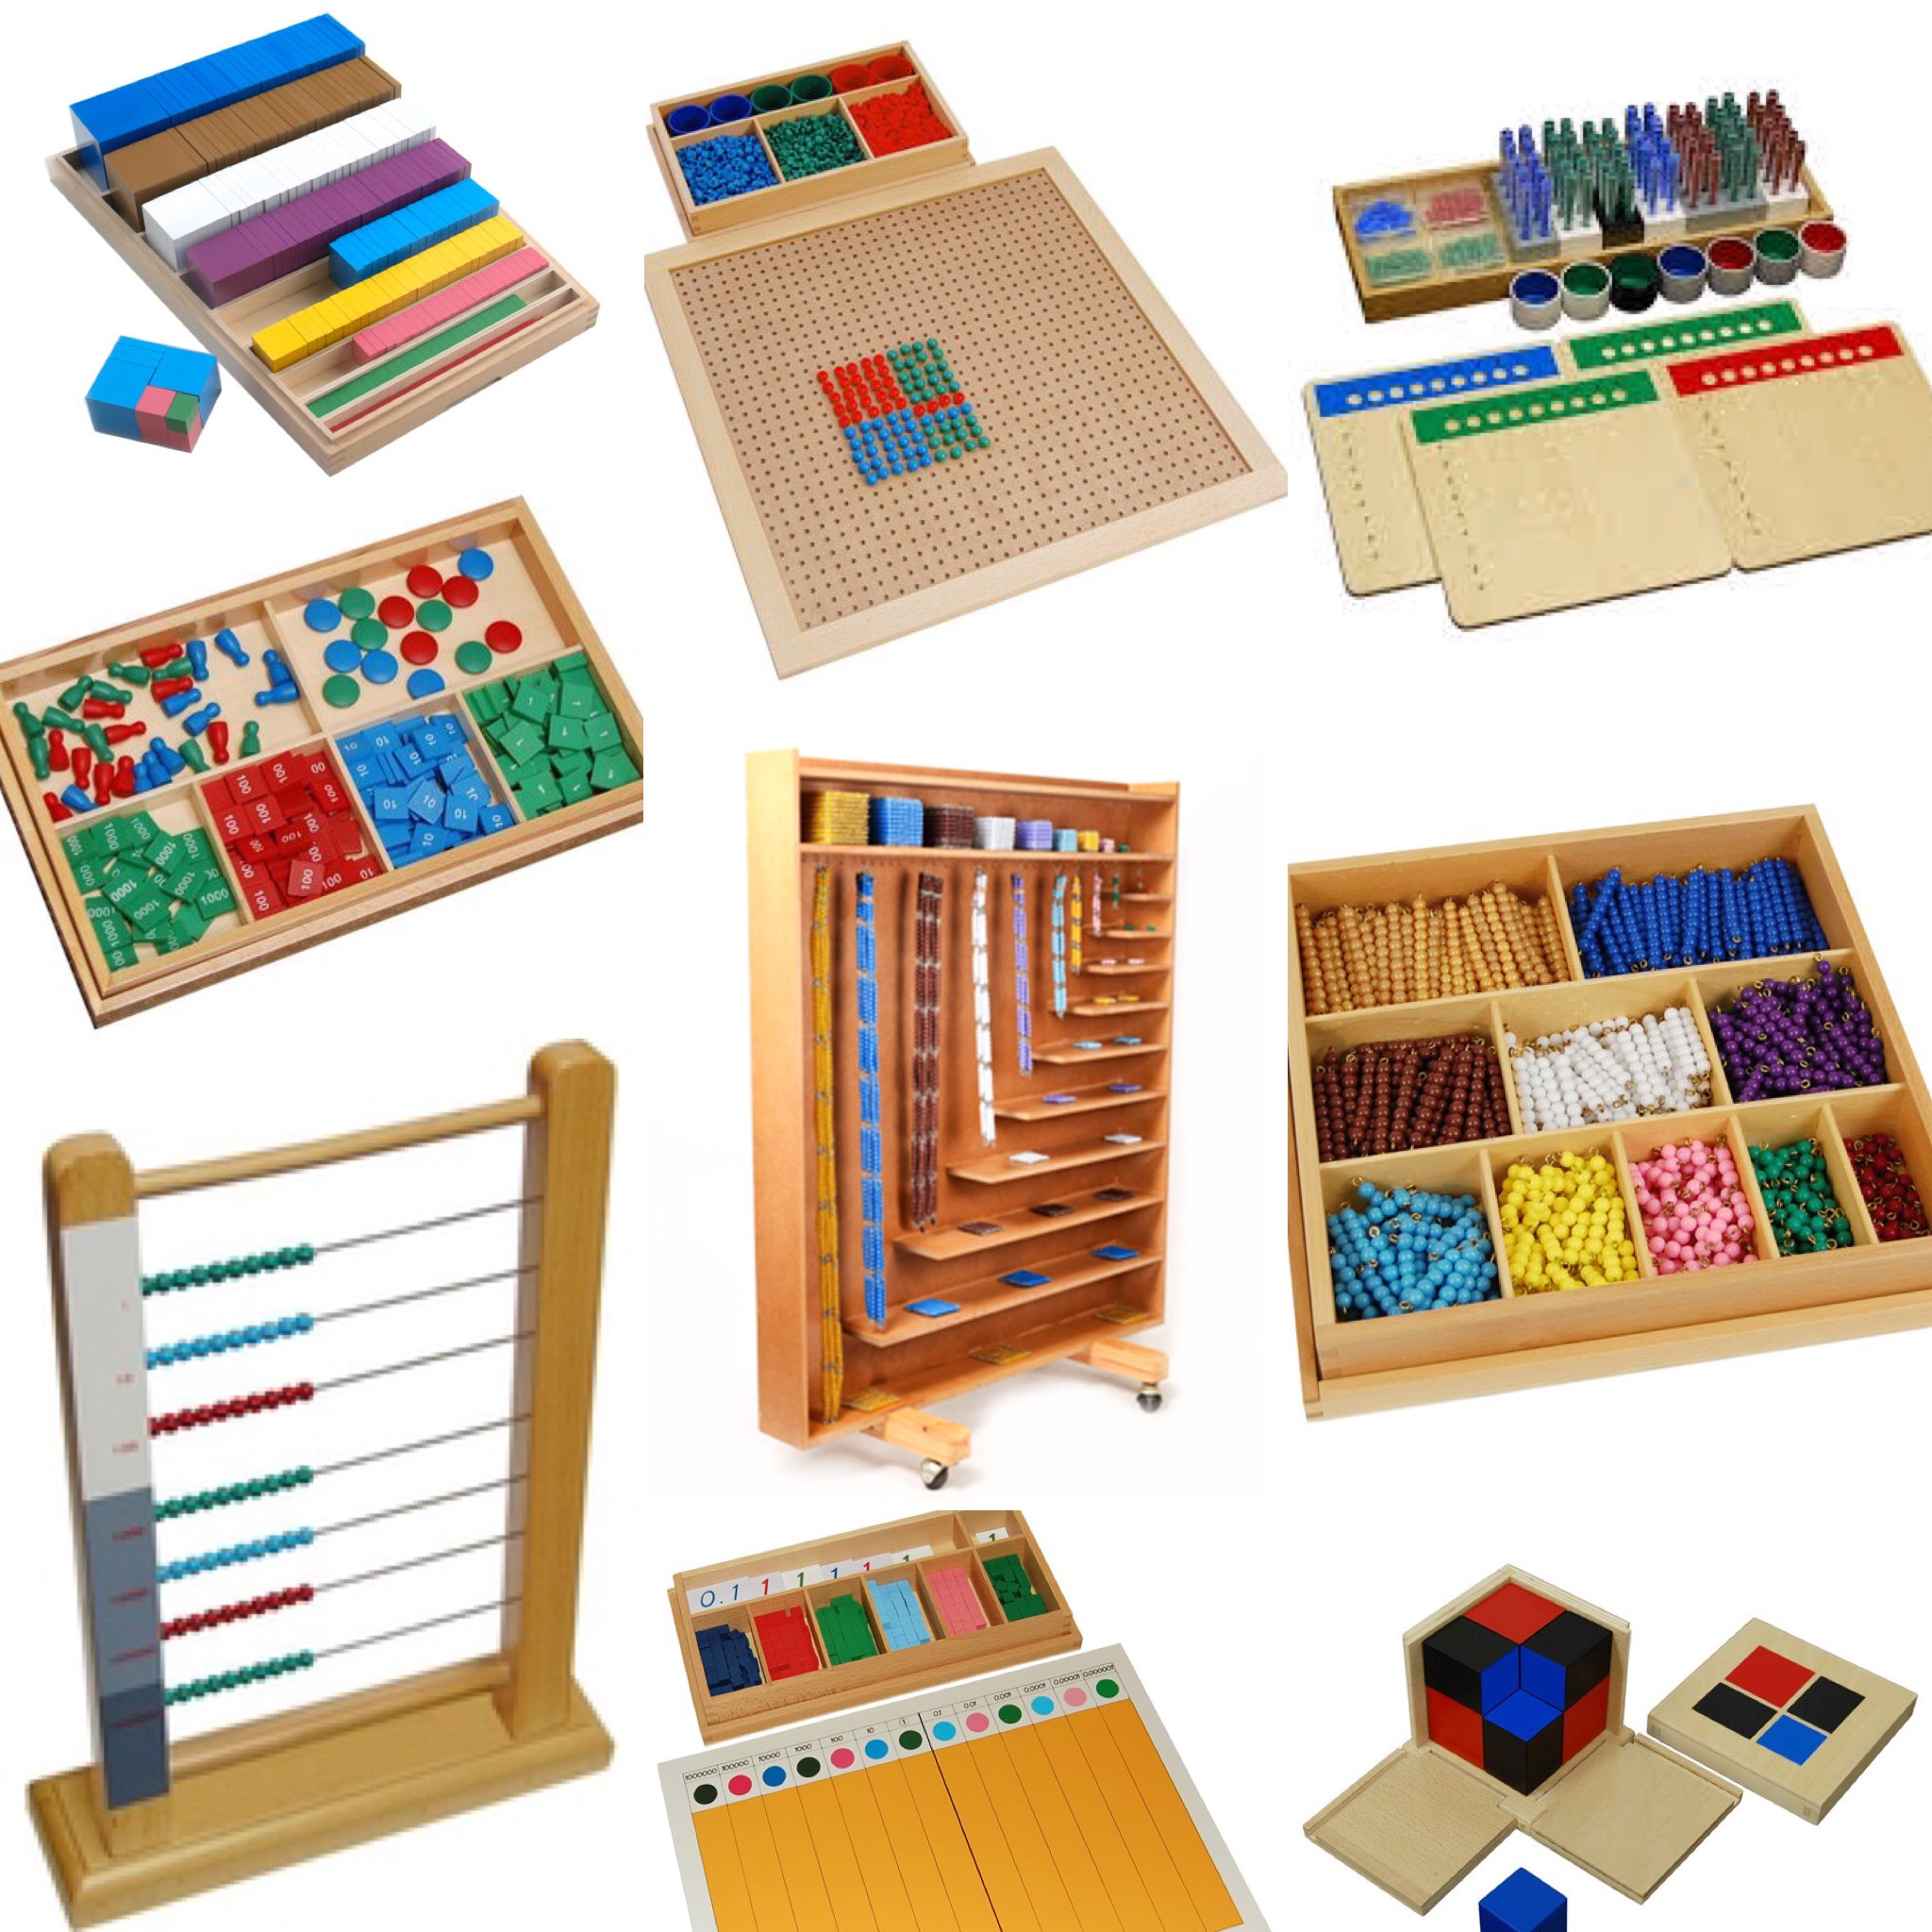 Montessori Math Materials You Absolutely Need For Elementary Guavarama